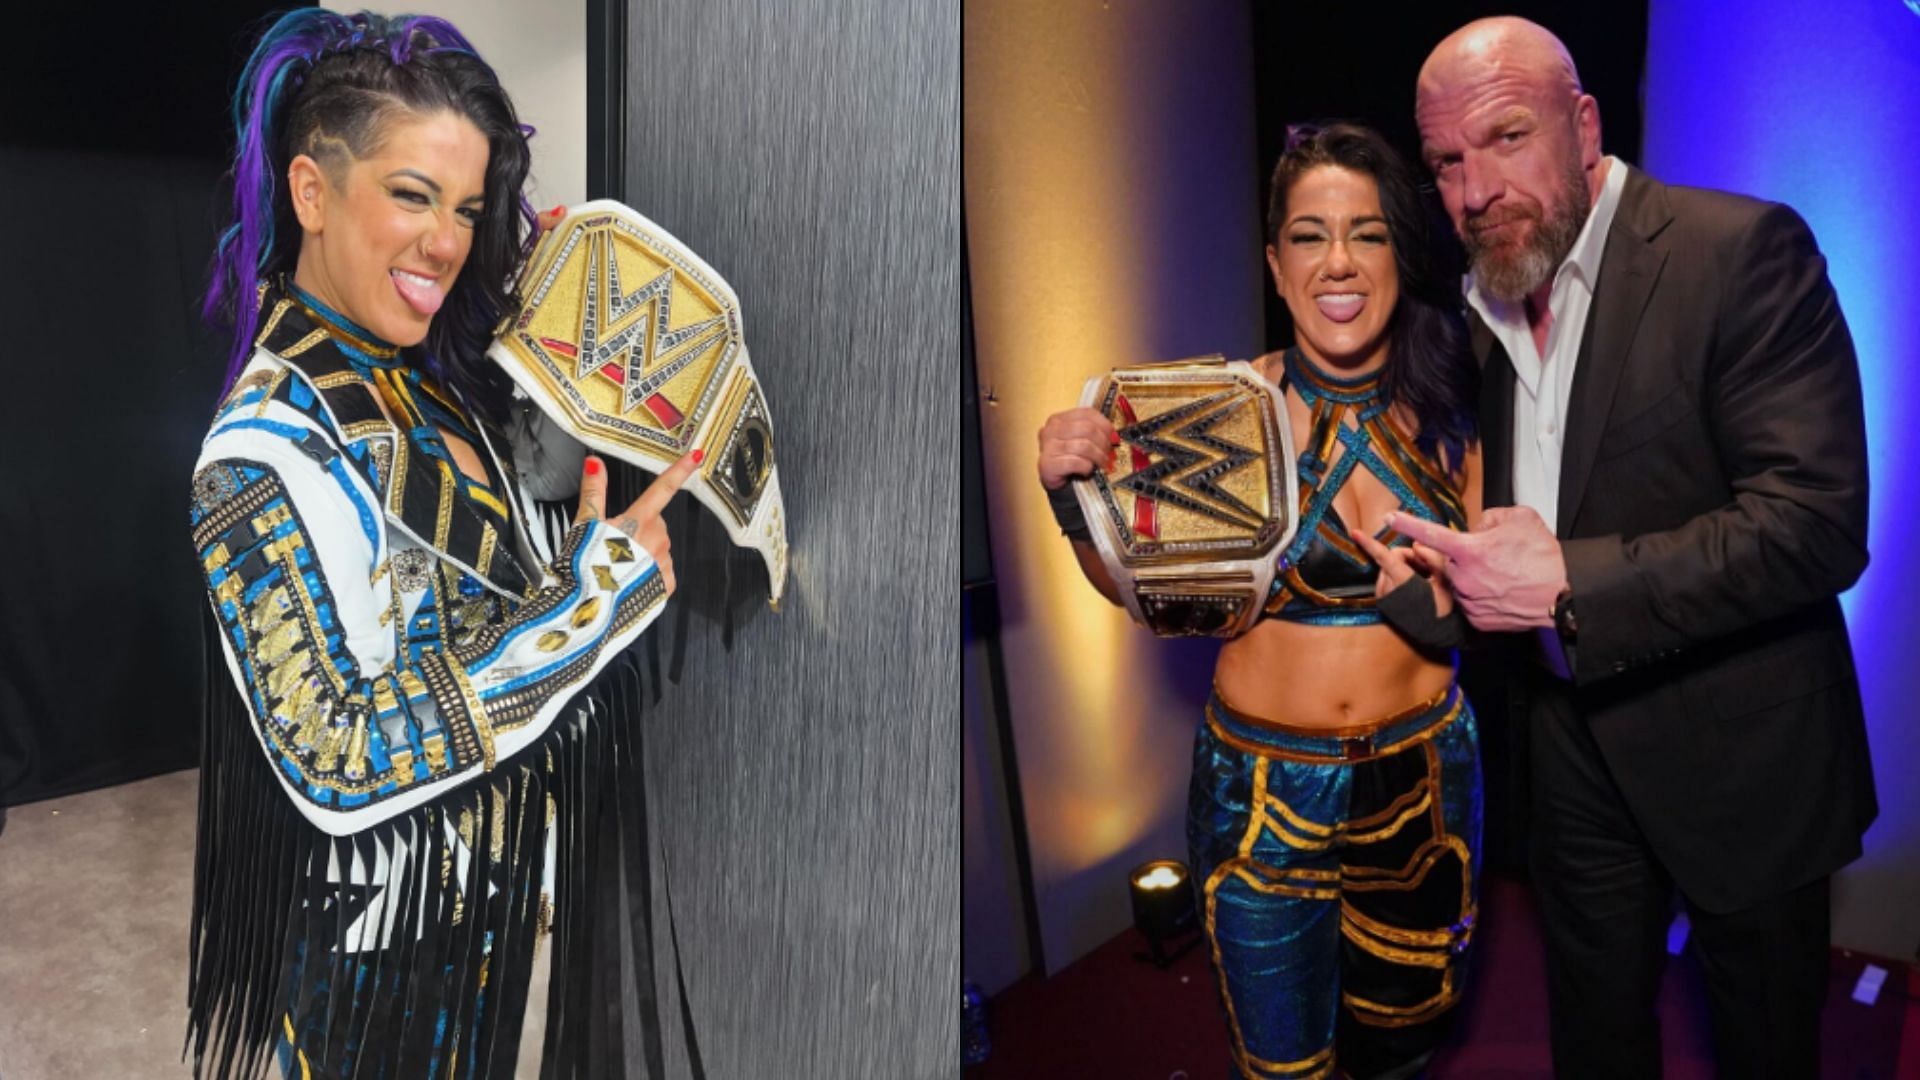 Bayley after retaining her title at Backlash with Triple H